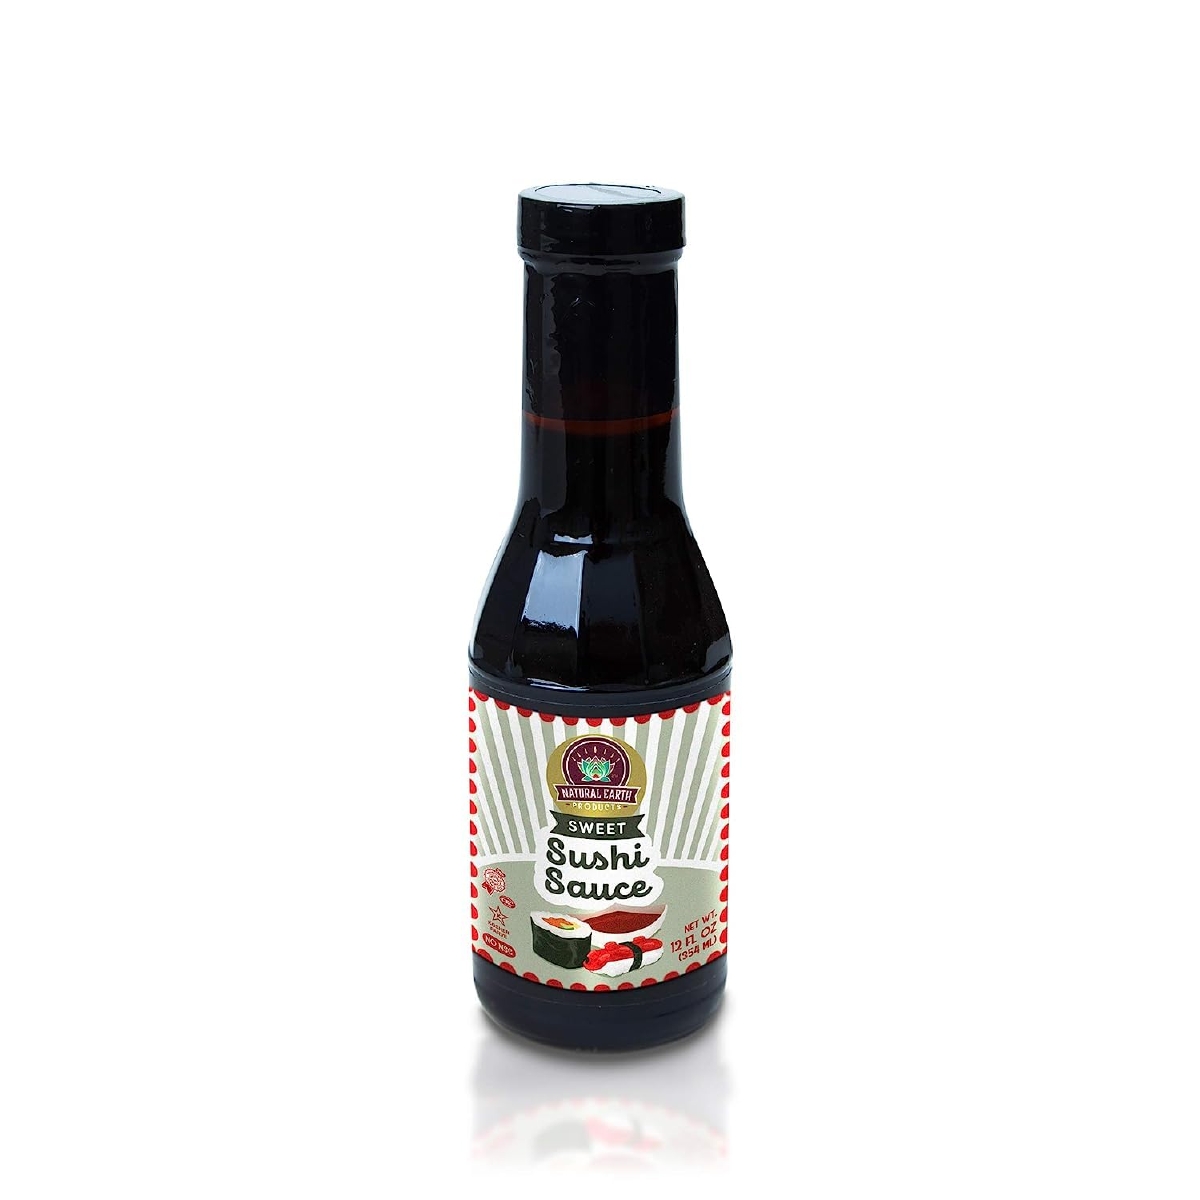 A glass bottle of Natural Earth Products brand sweet sushi sauce with black lid against a white background.